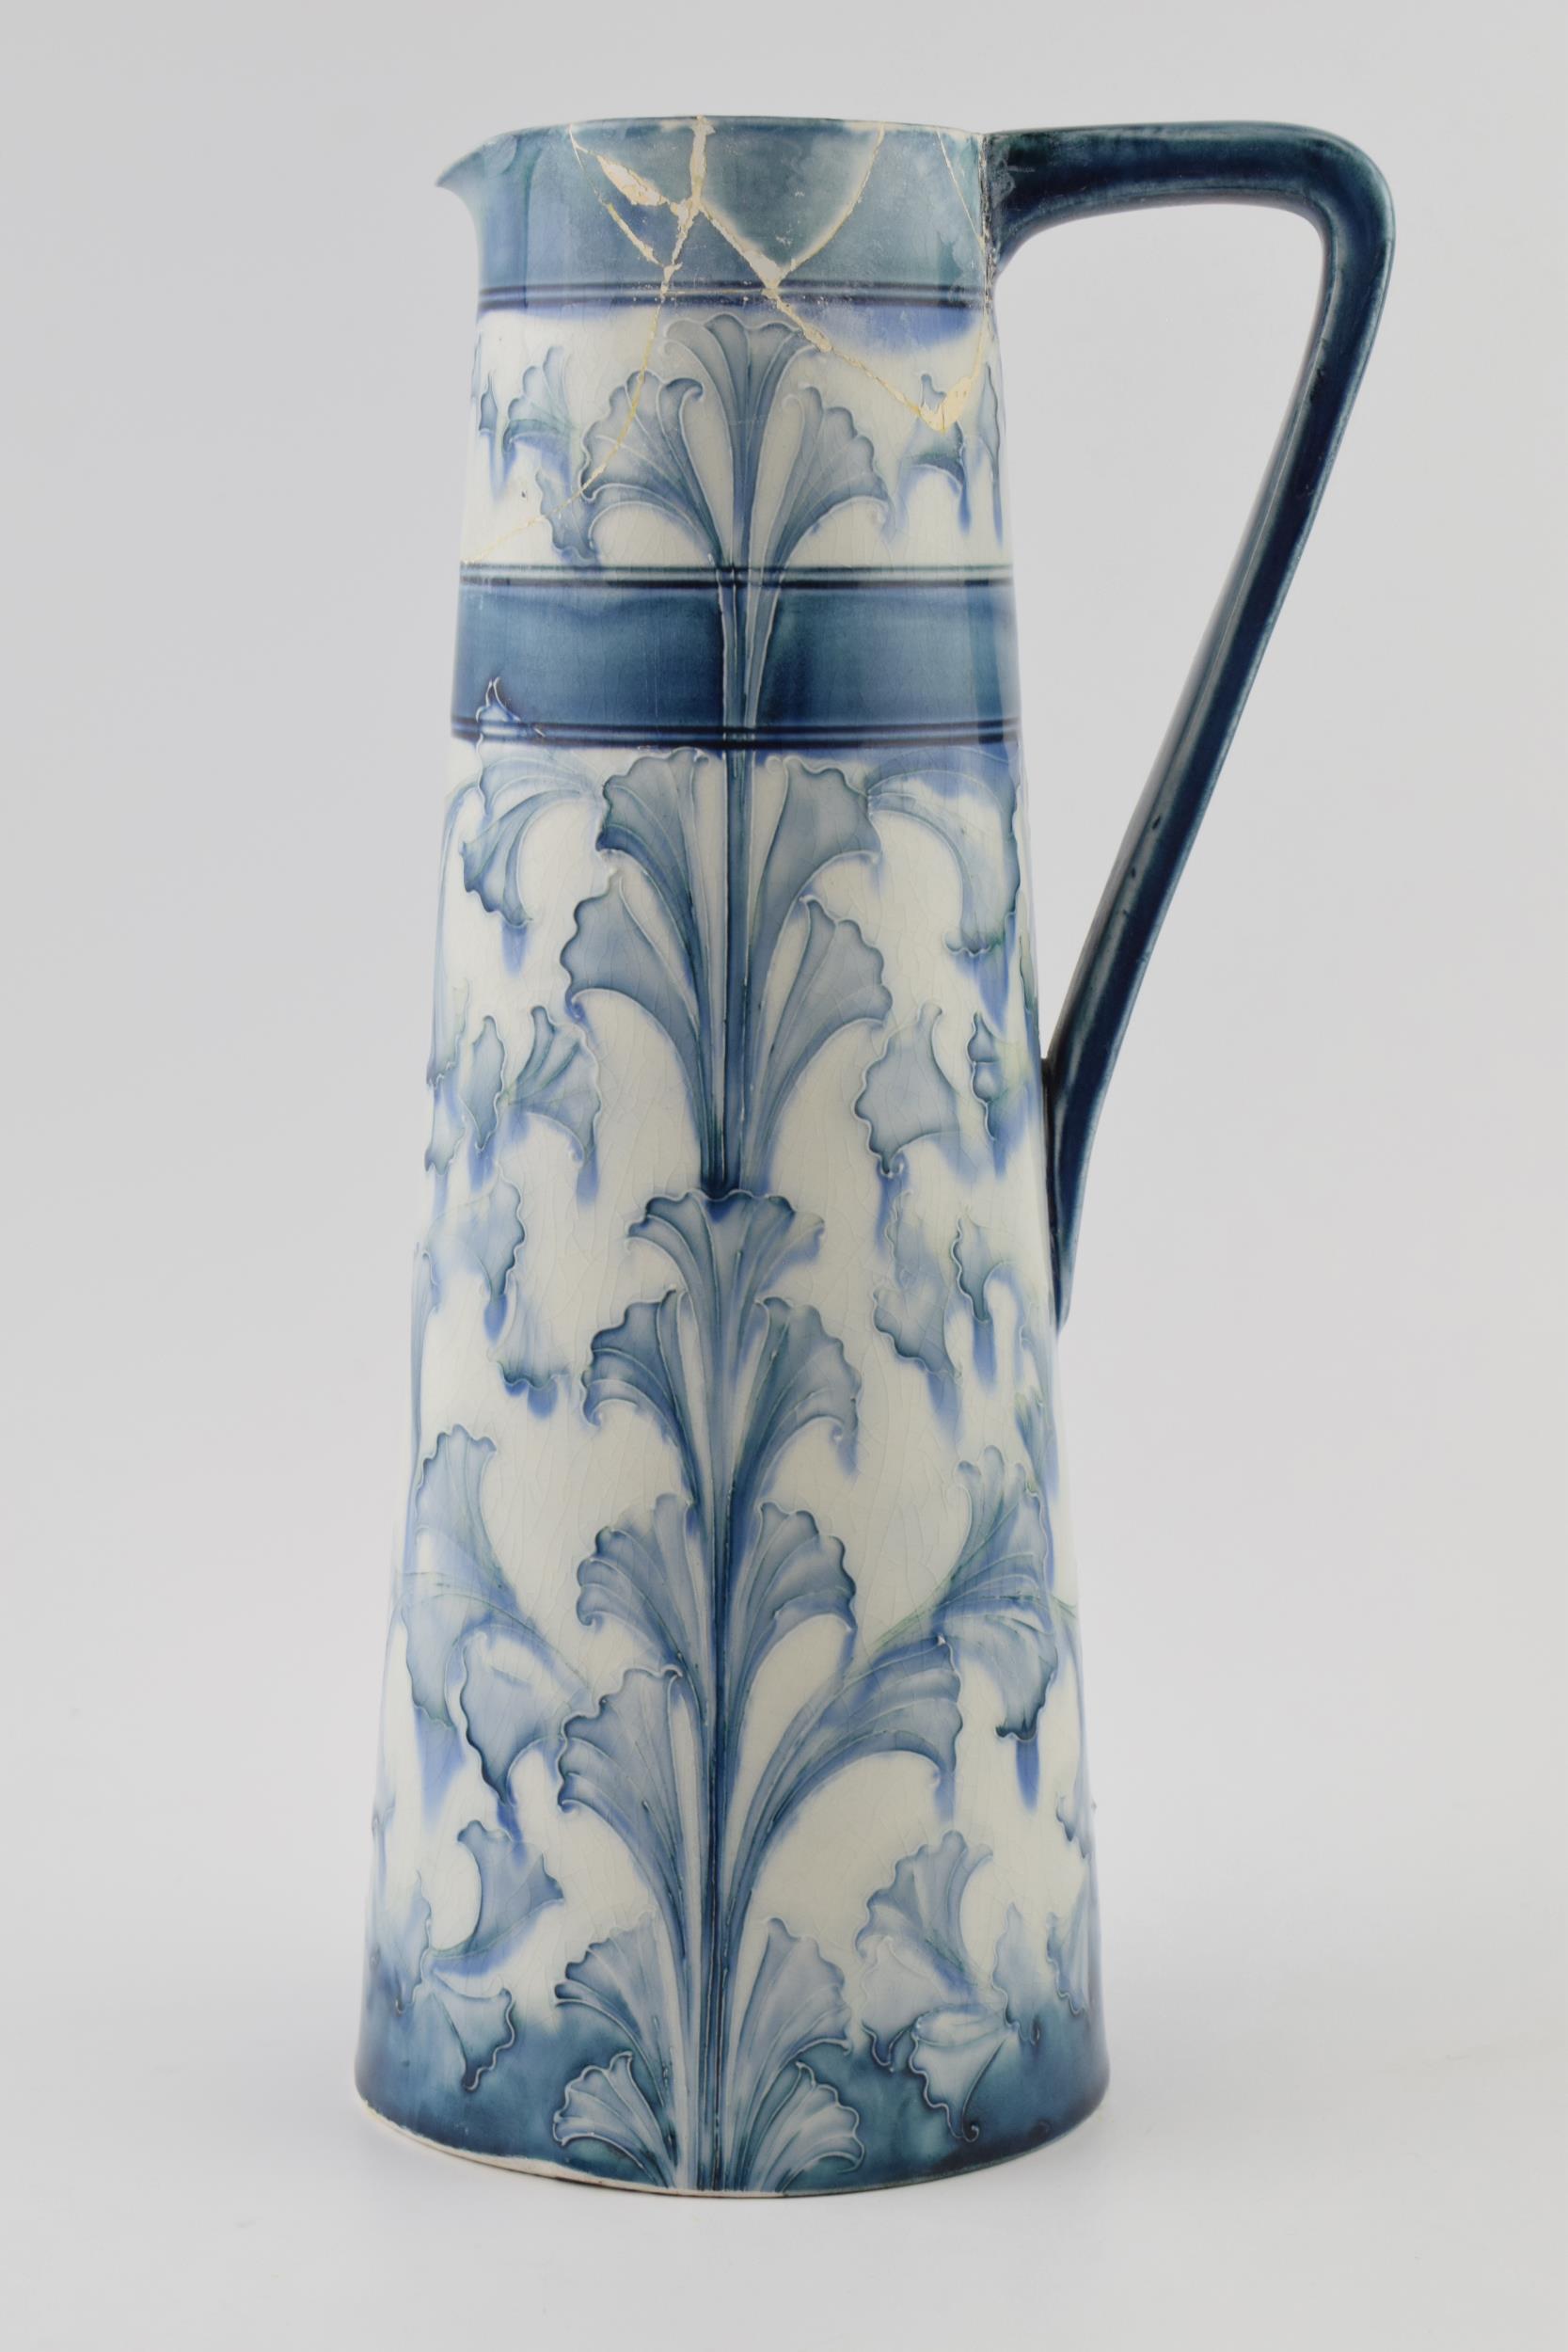 Early Moorcroft blue and white Florian pitcher, 28cm tall (restoration project).